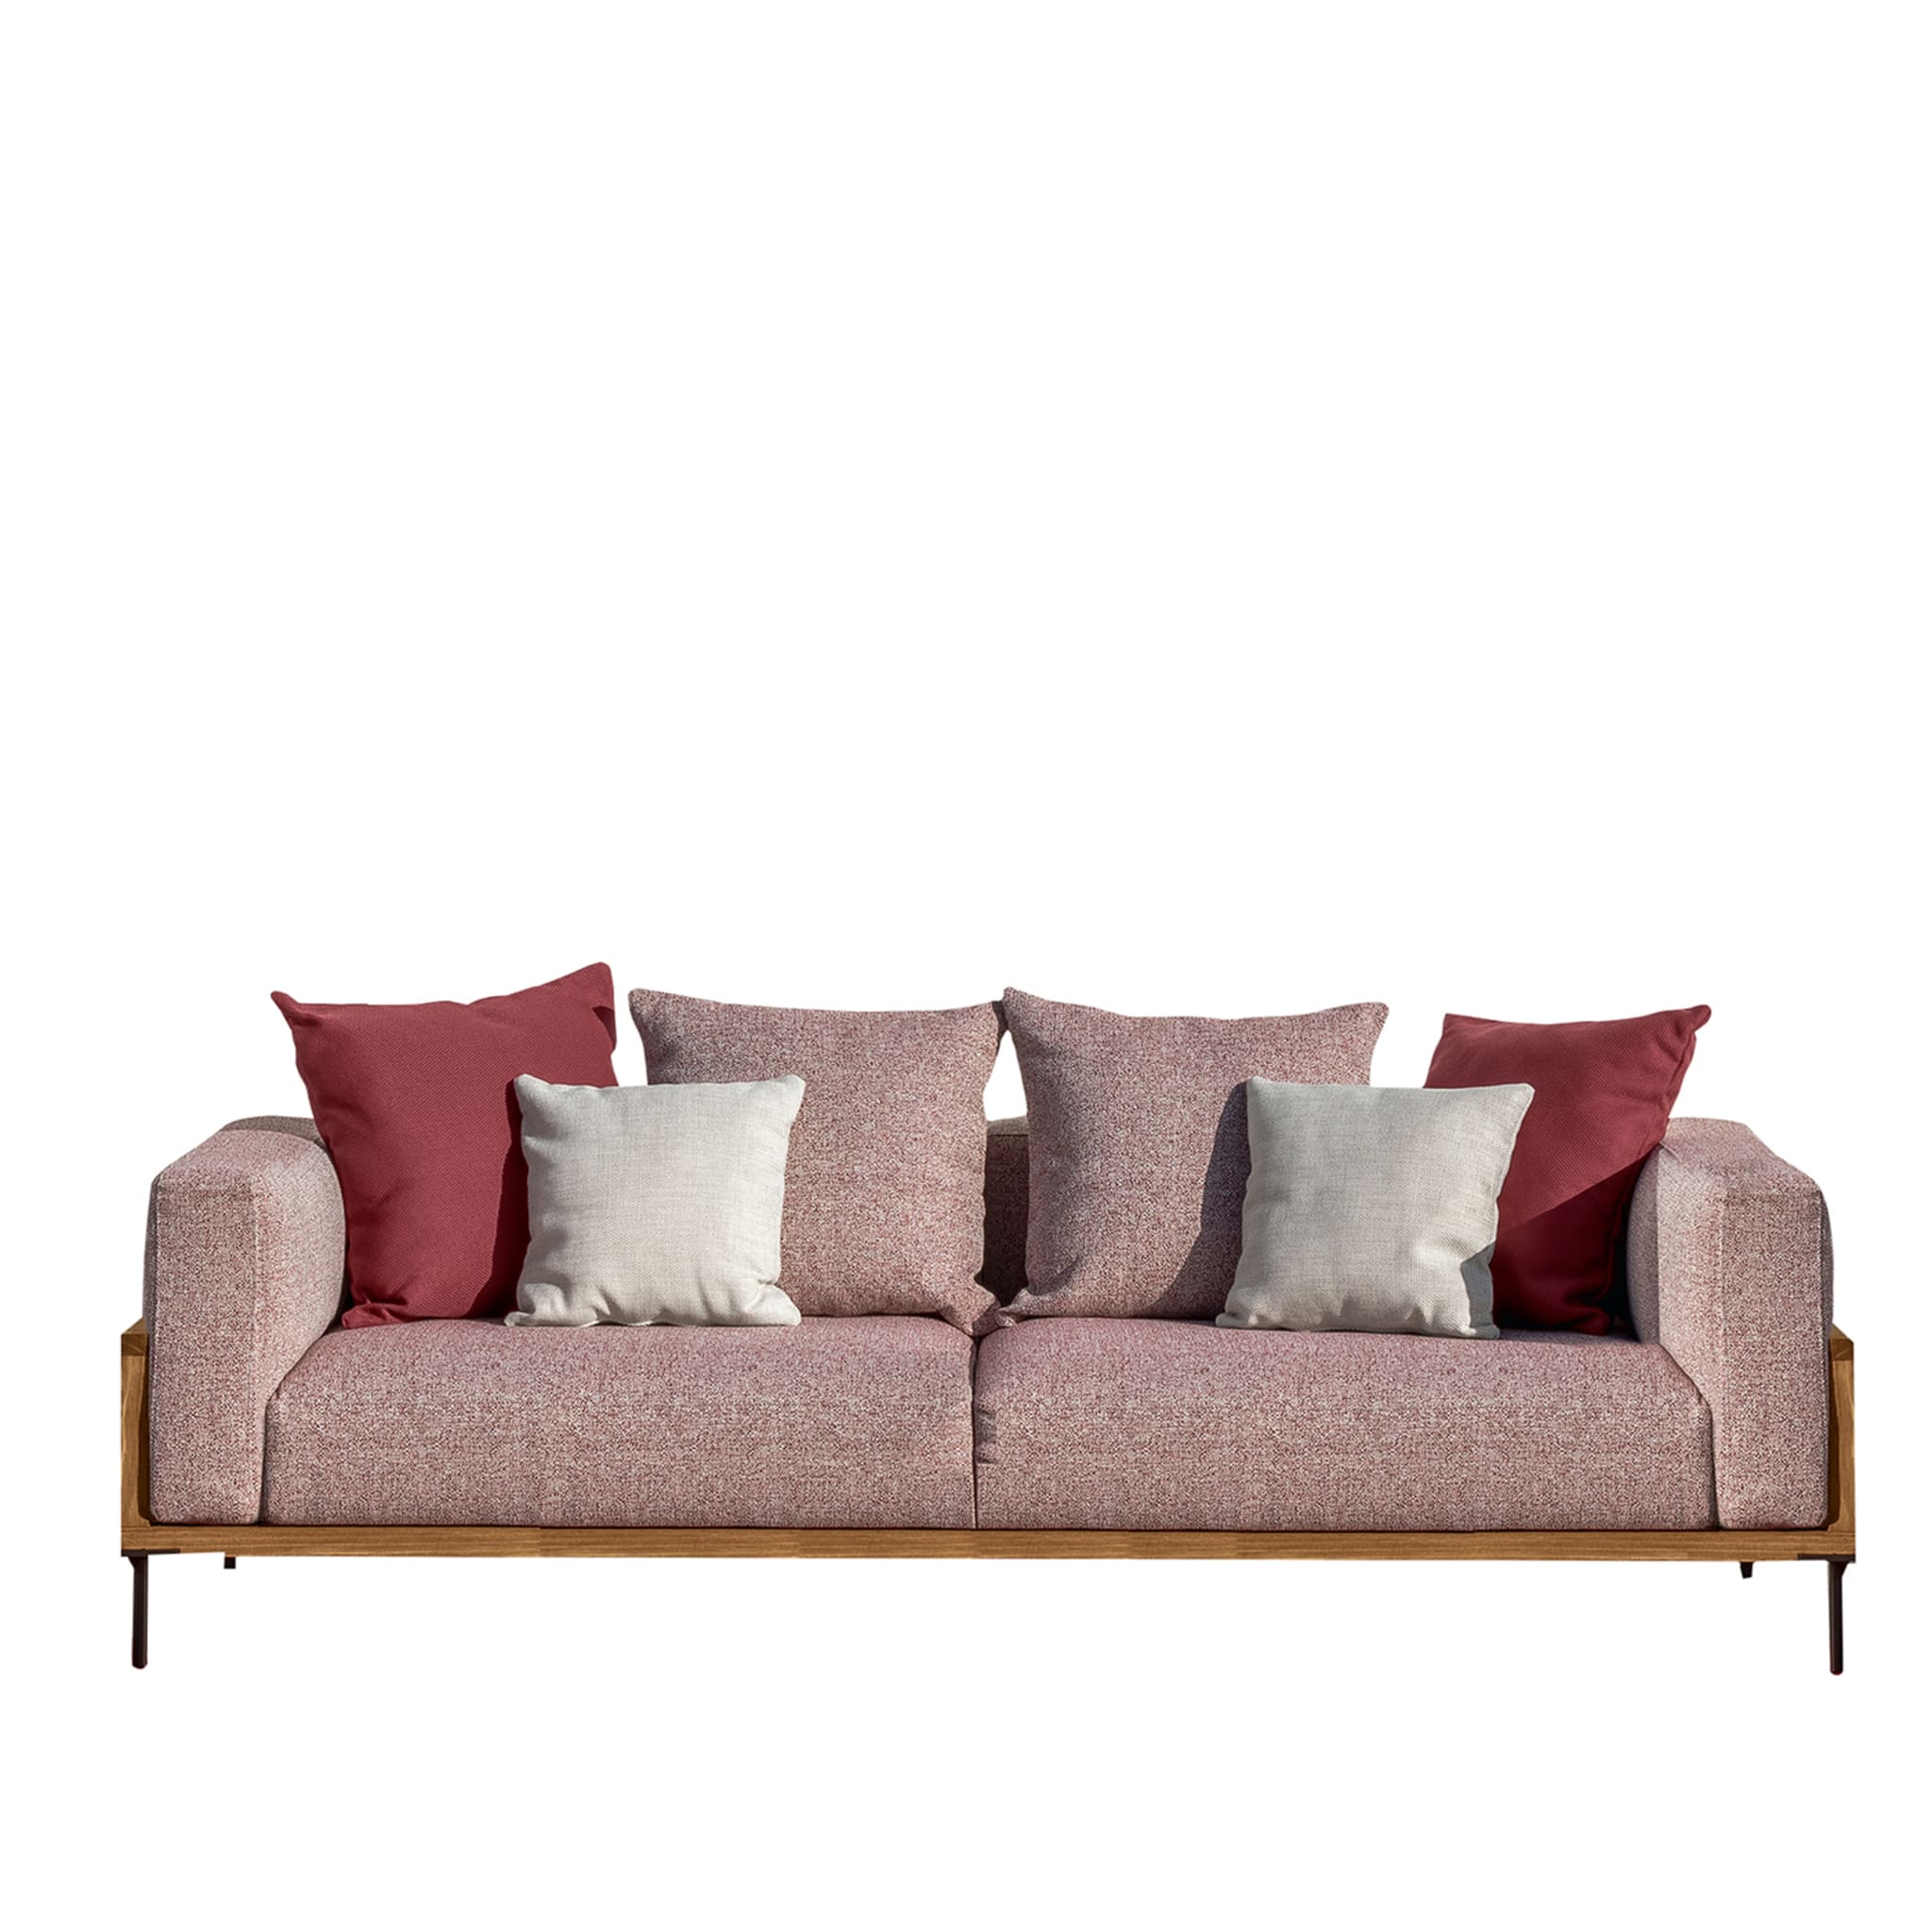 Cleo Brown Accoya Wood Sofa by Marco Acerbis - Main view